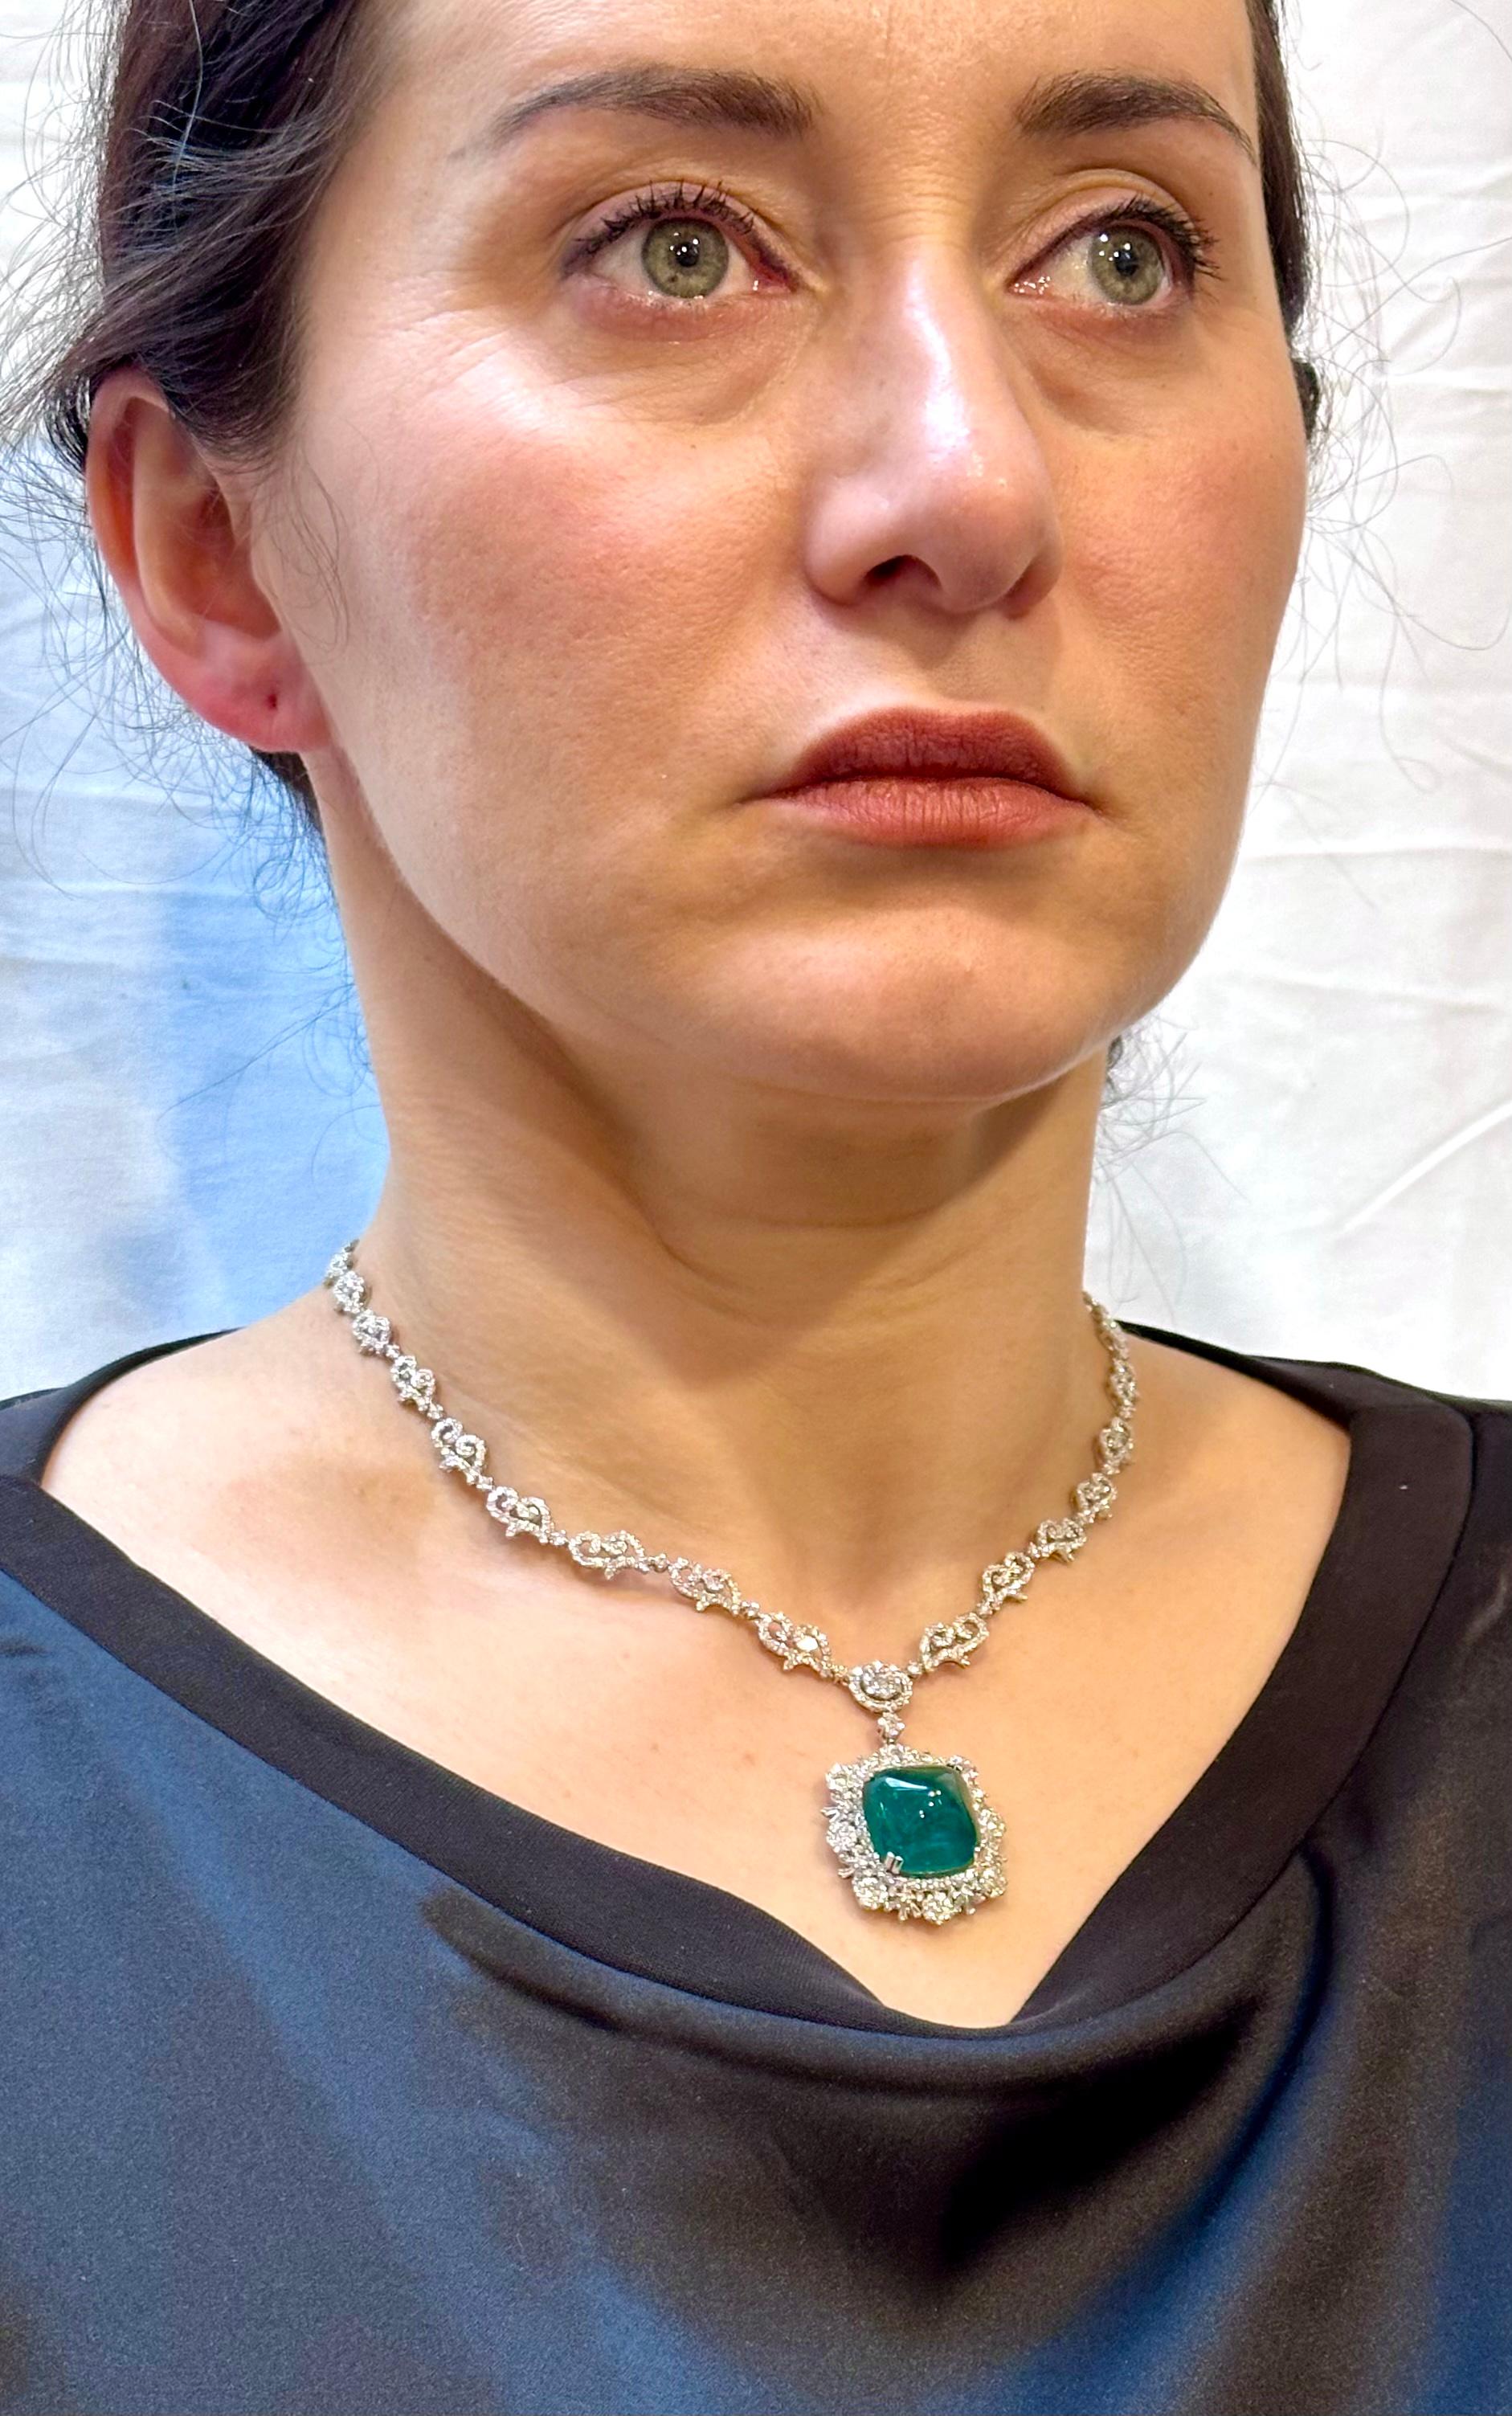 GIA 17 Ct Sugar Loaf Cabochon Colombian Emerald & 13 Ct Diamond Necklace 18KWG For Sale 6